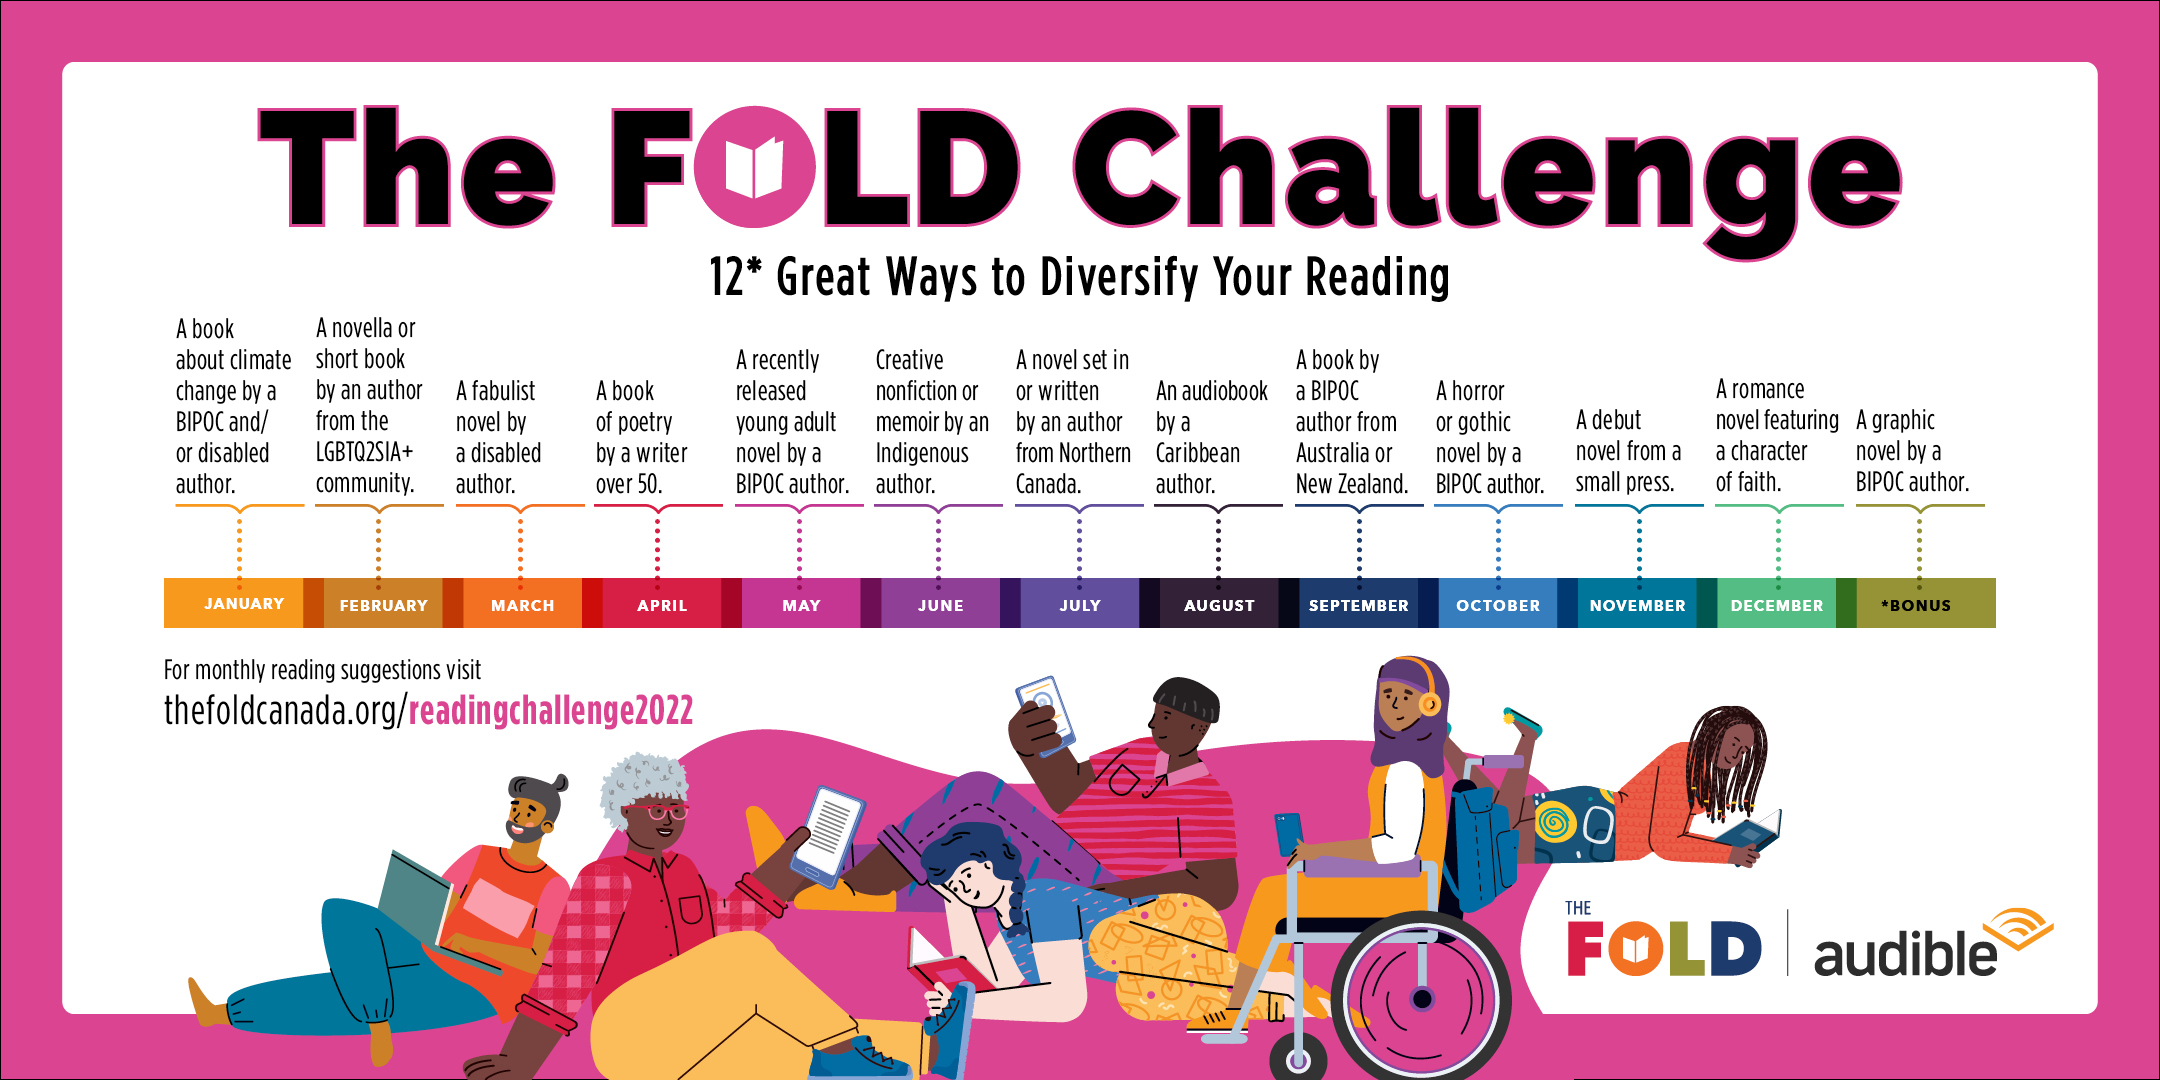 [ID: A graphic showcasing thirteen challenges for the FOLD Challenge 2022. For full list of challenges, please visit thefoldcanada.org/readingchallenge2022]